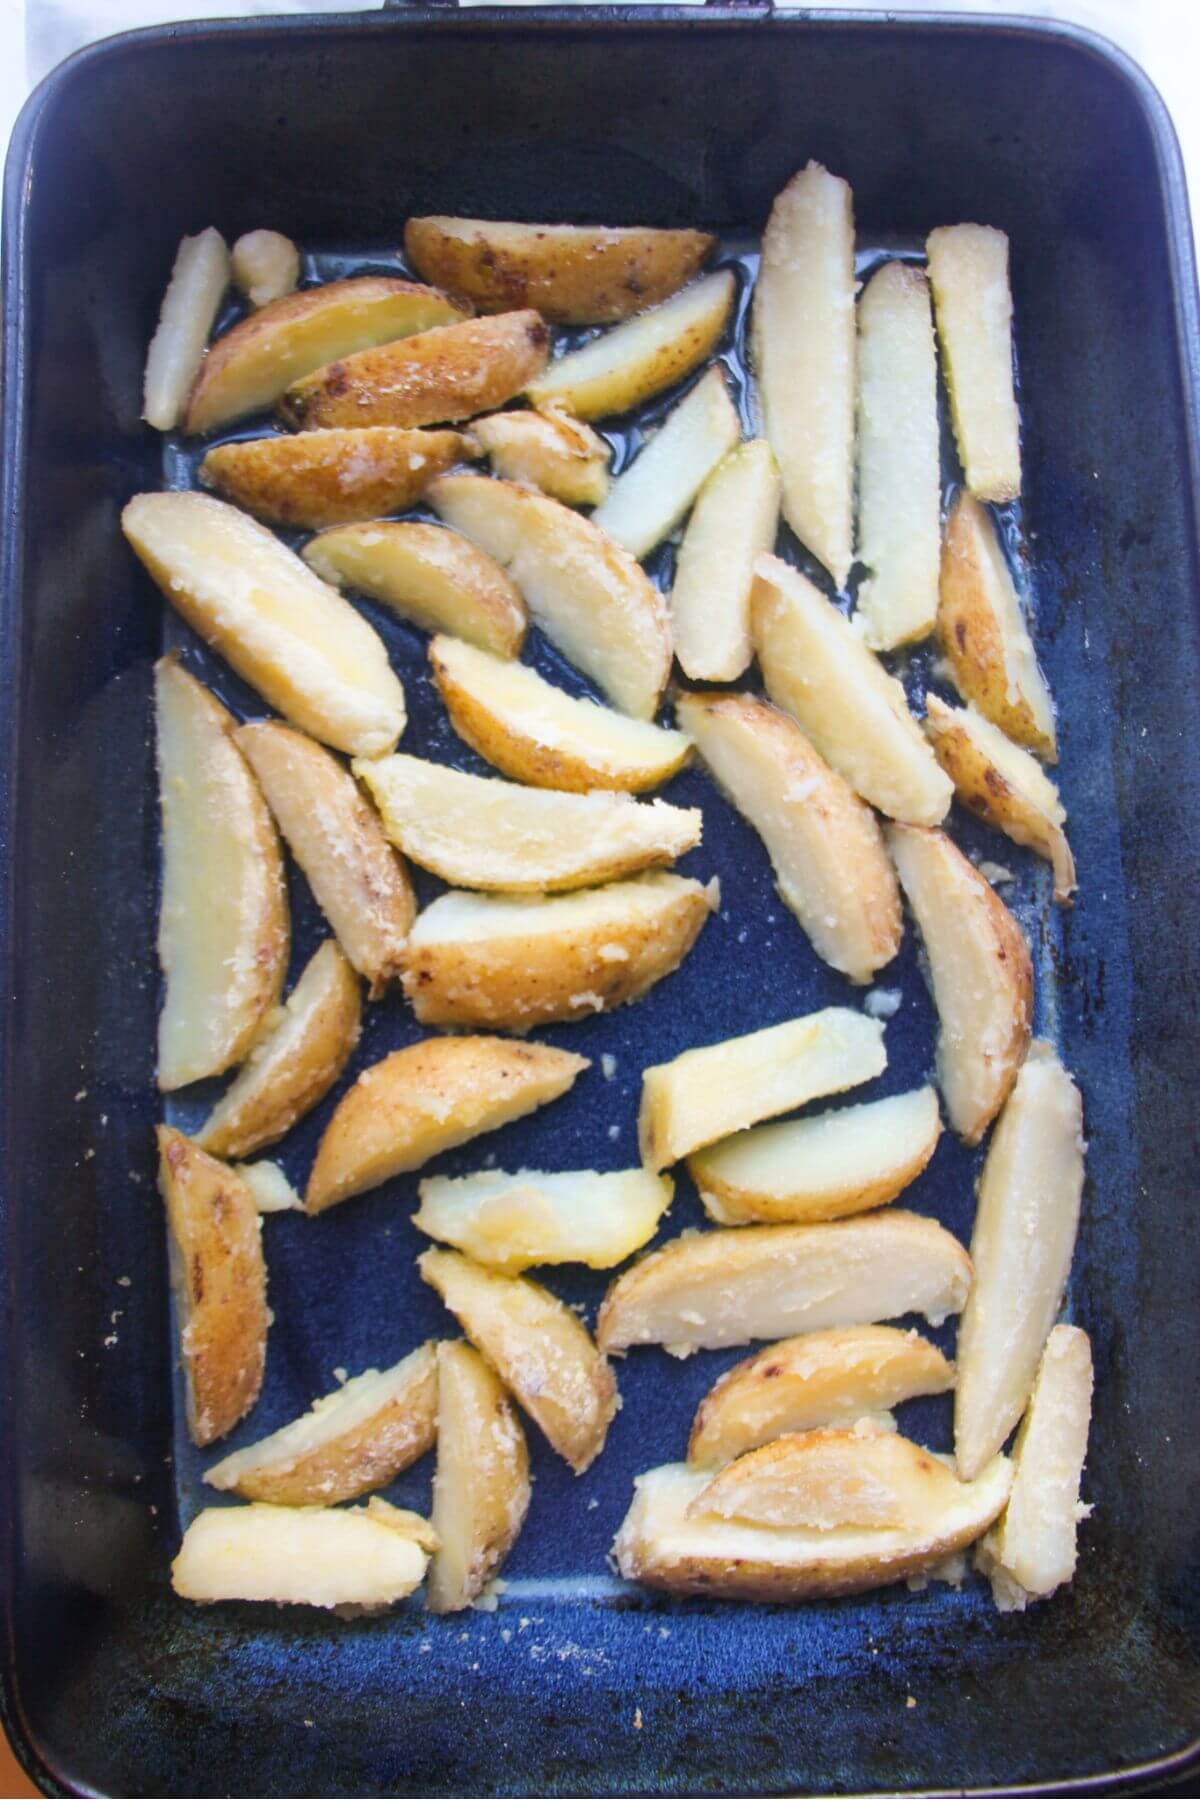 Parboiled wedges in a large blue oven dish.